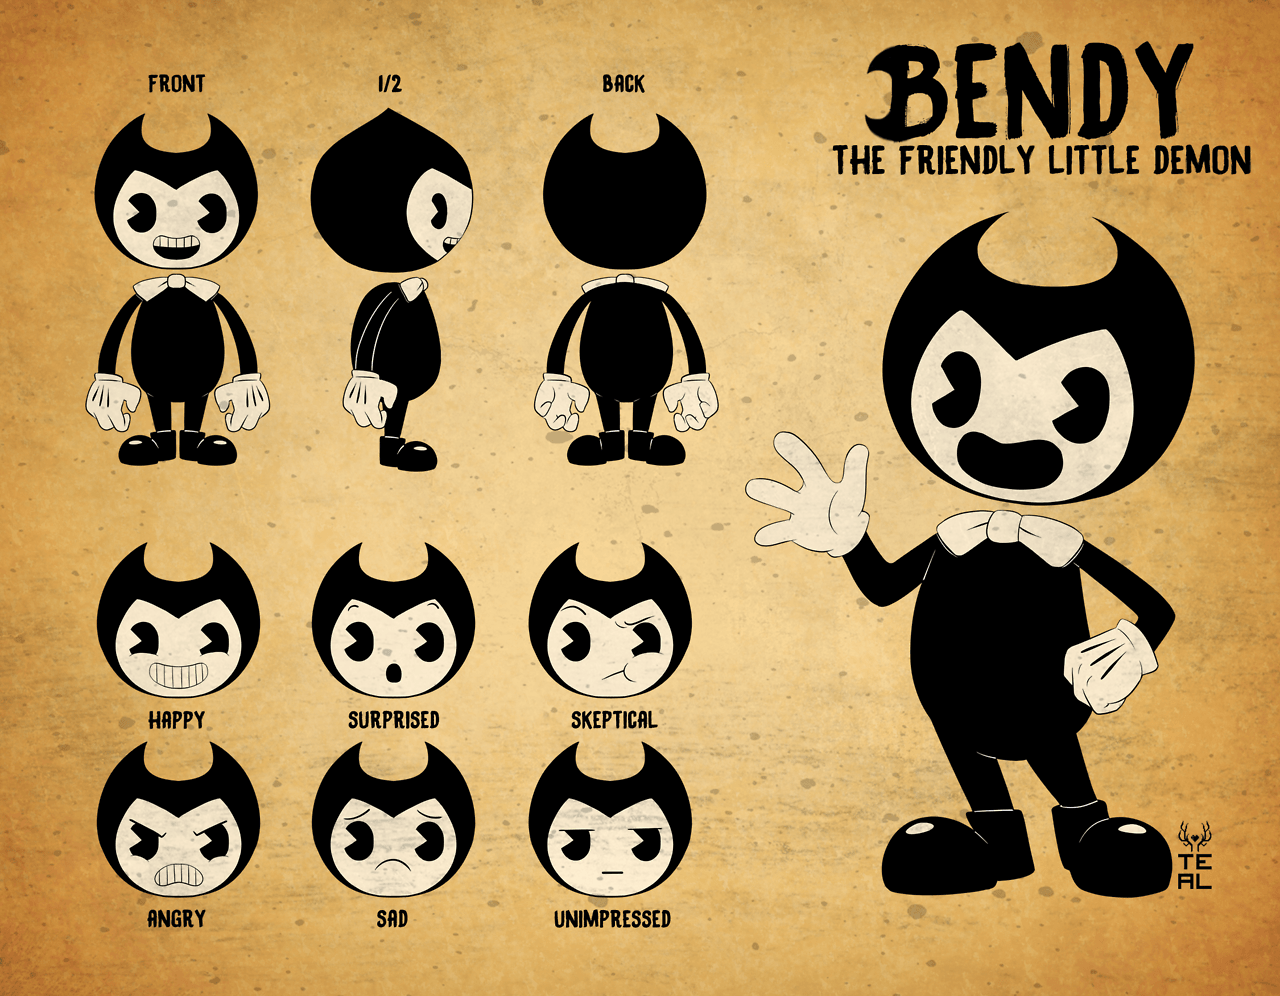 HD wallpaper Video Game Bendy and the Ink Machine Bendy Bendy and the  Ink Machine  Wallpaper Flare